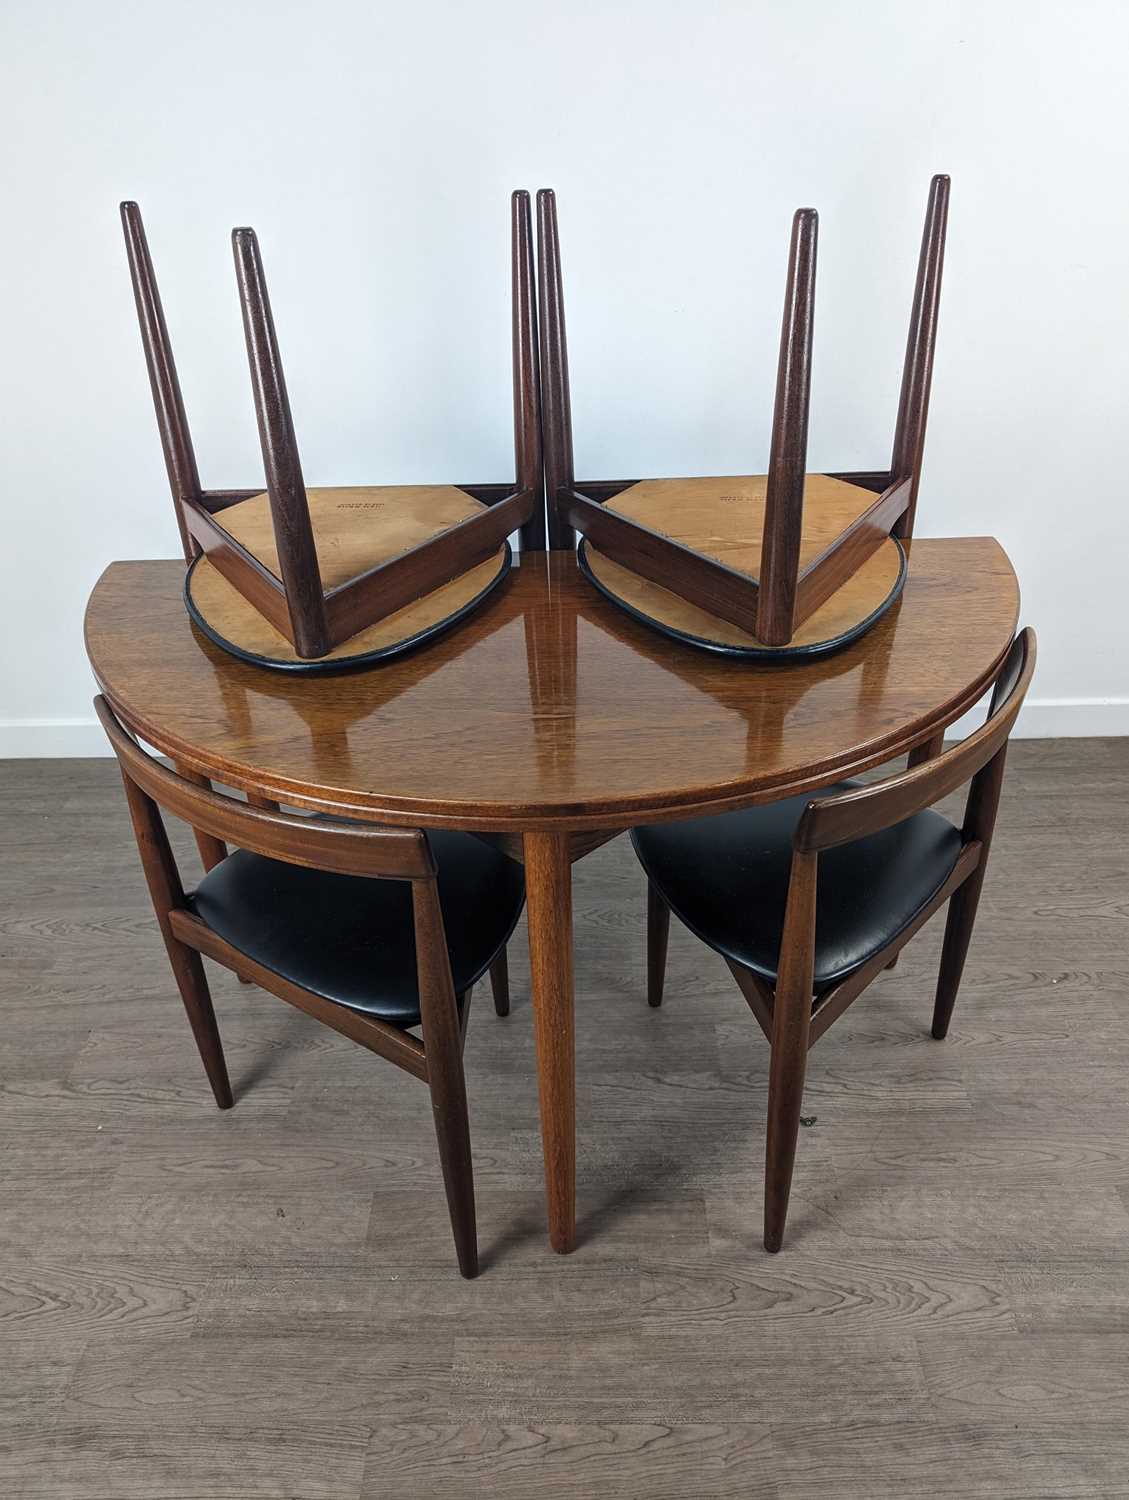 HANS OLSEN (DANISH, 1919-1992) FOR FREM ROJLE, 'ROUNDETTE' DINING TABLE AND SET OF FOUR CHAIRS, CIRC - Image 2 of 6